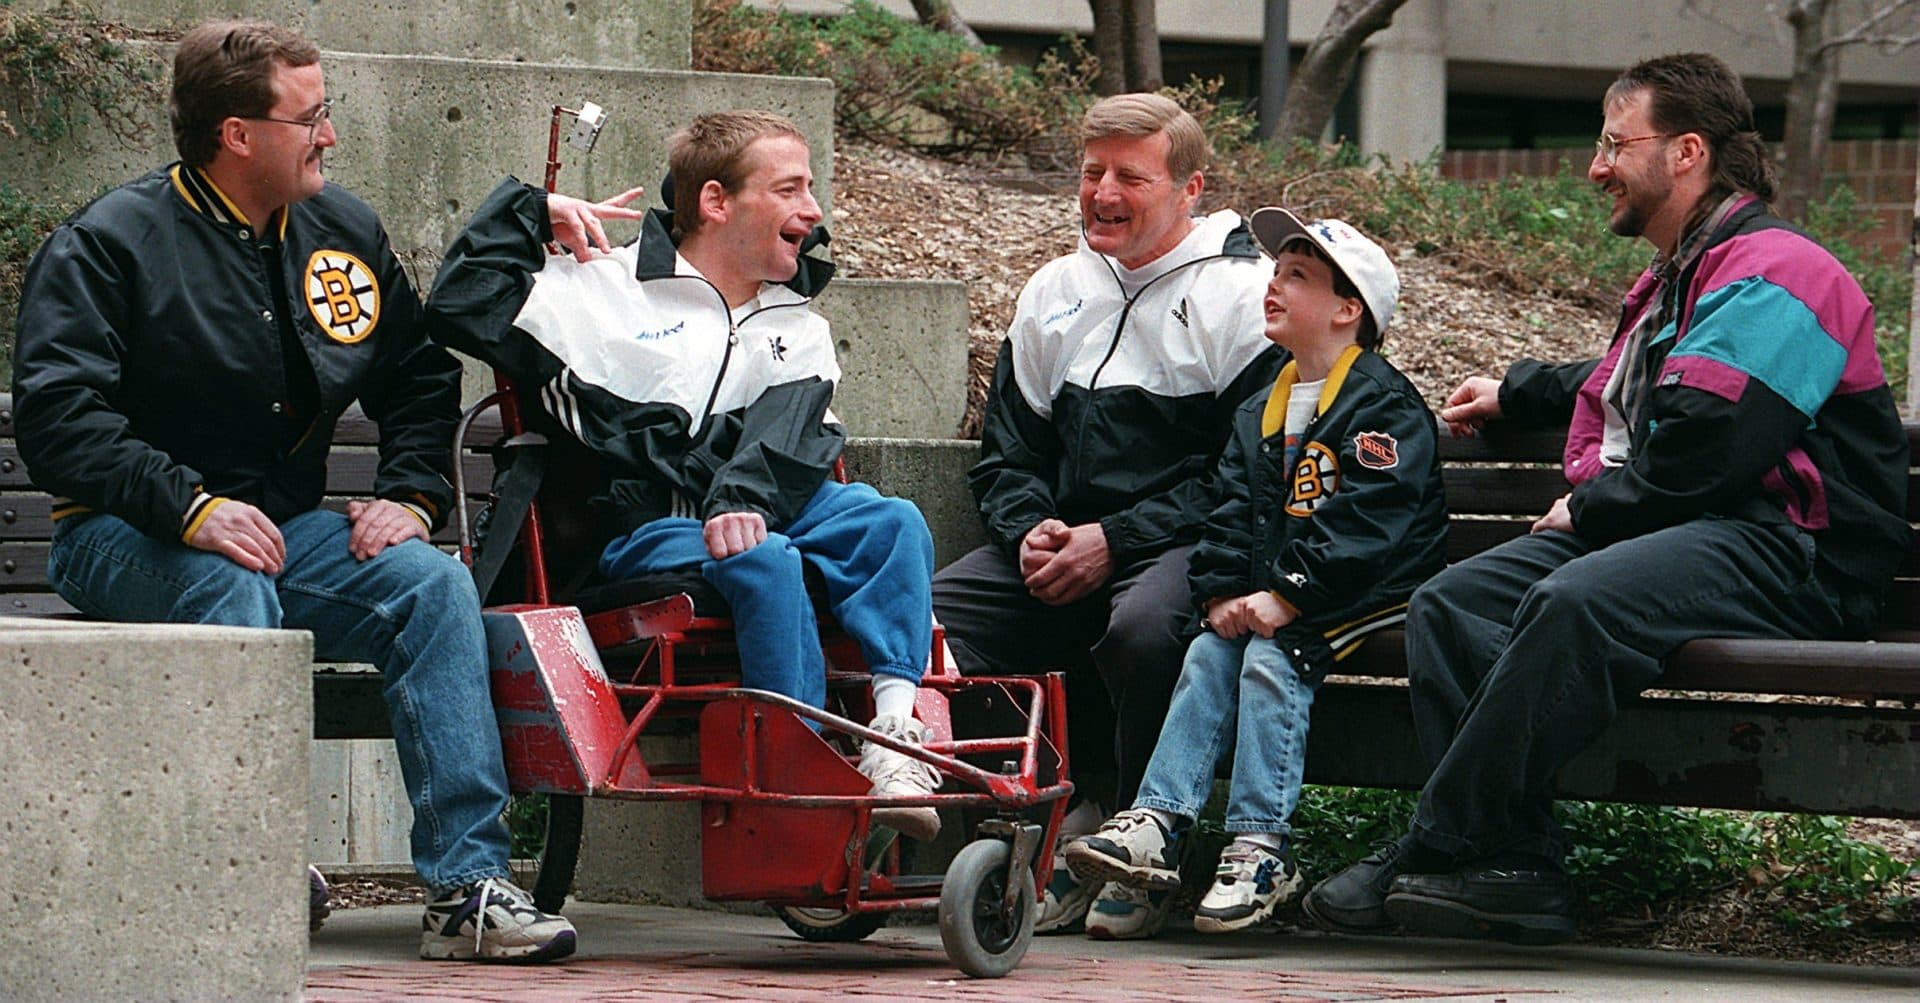 Marathoner Dick Hoyt with his sons, left to right, Robert, Rick, Russell and grandson Jayme (Roberts son) in 1996. (Frank O'Brien/The Boston Globe via Getty Images)